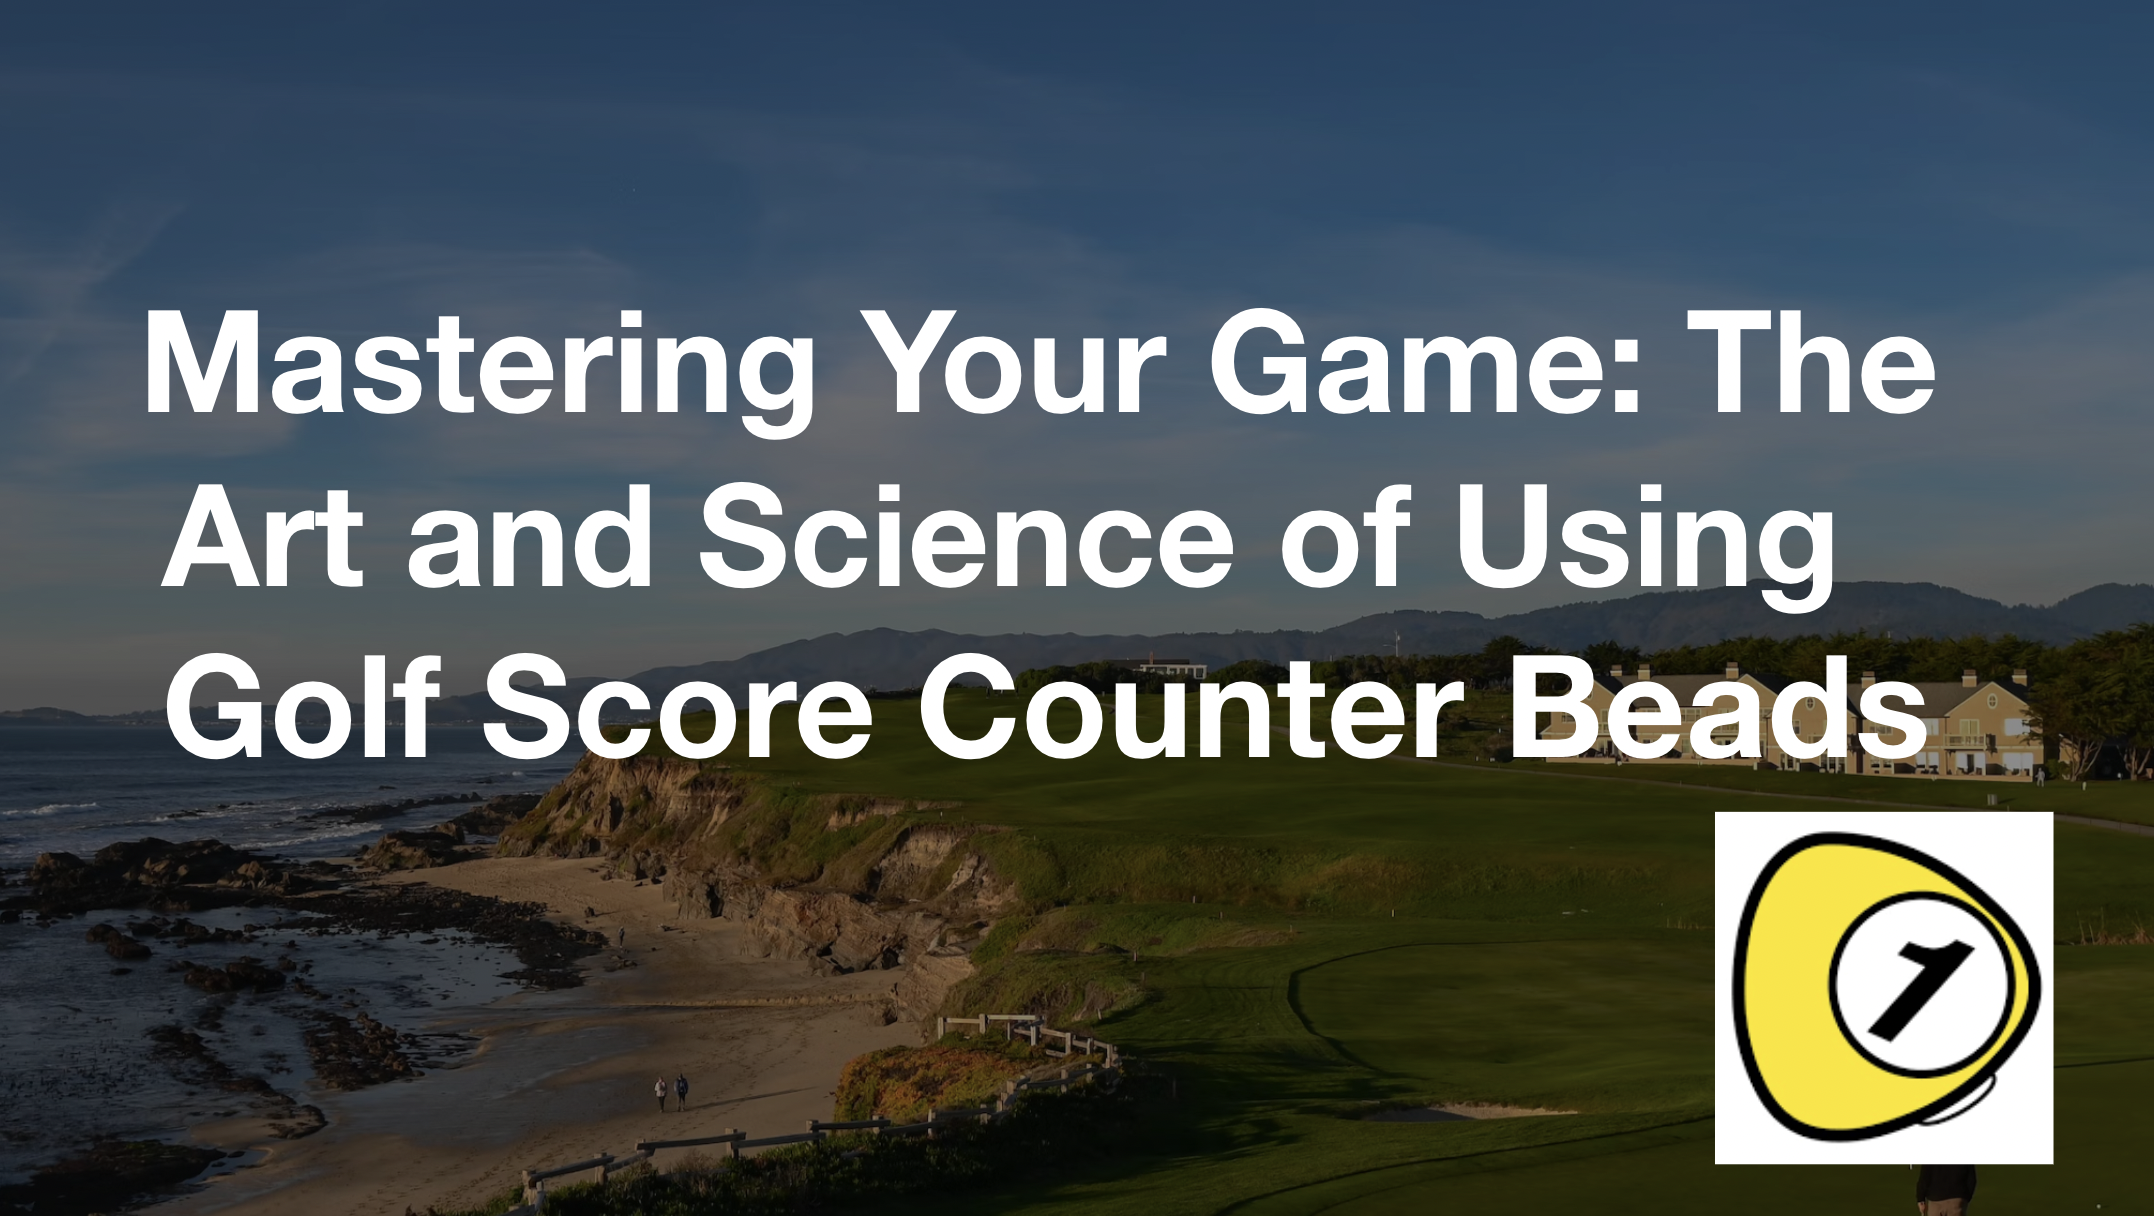 golfscorecounterdotcom_Mastering Your Game: The Art and Science of Using Golf Score Counter Beads